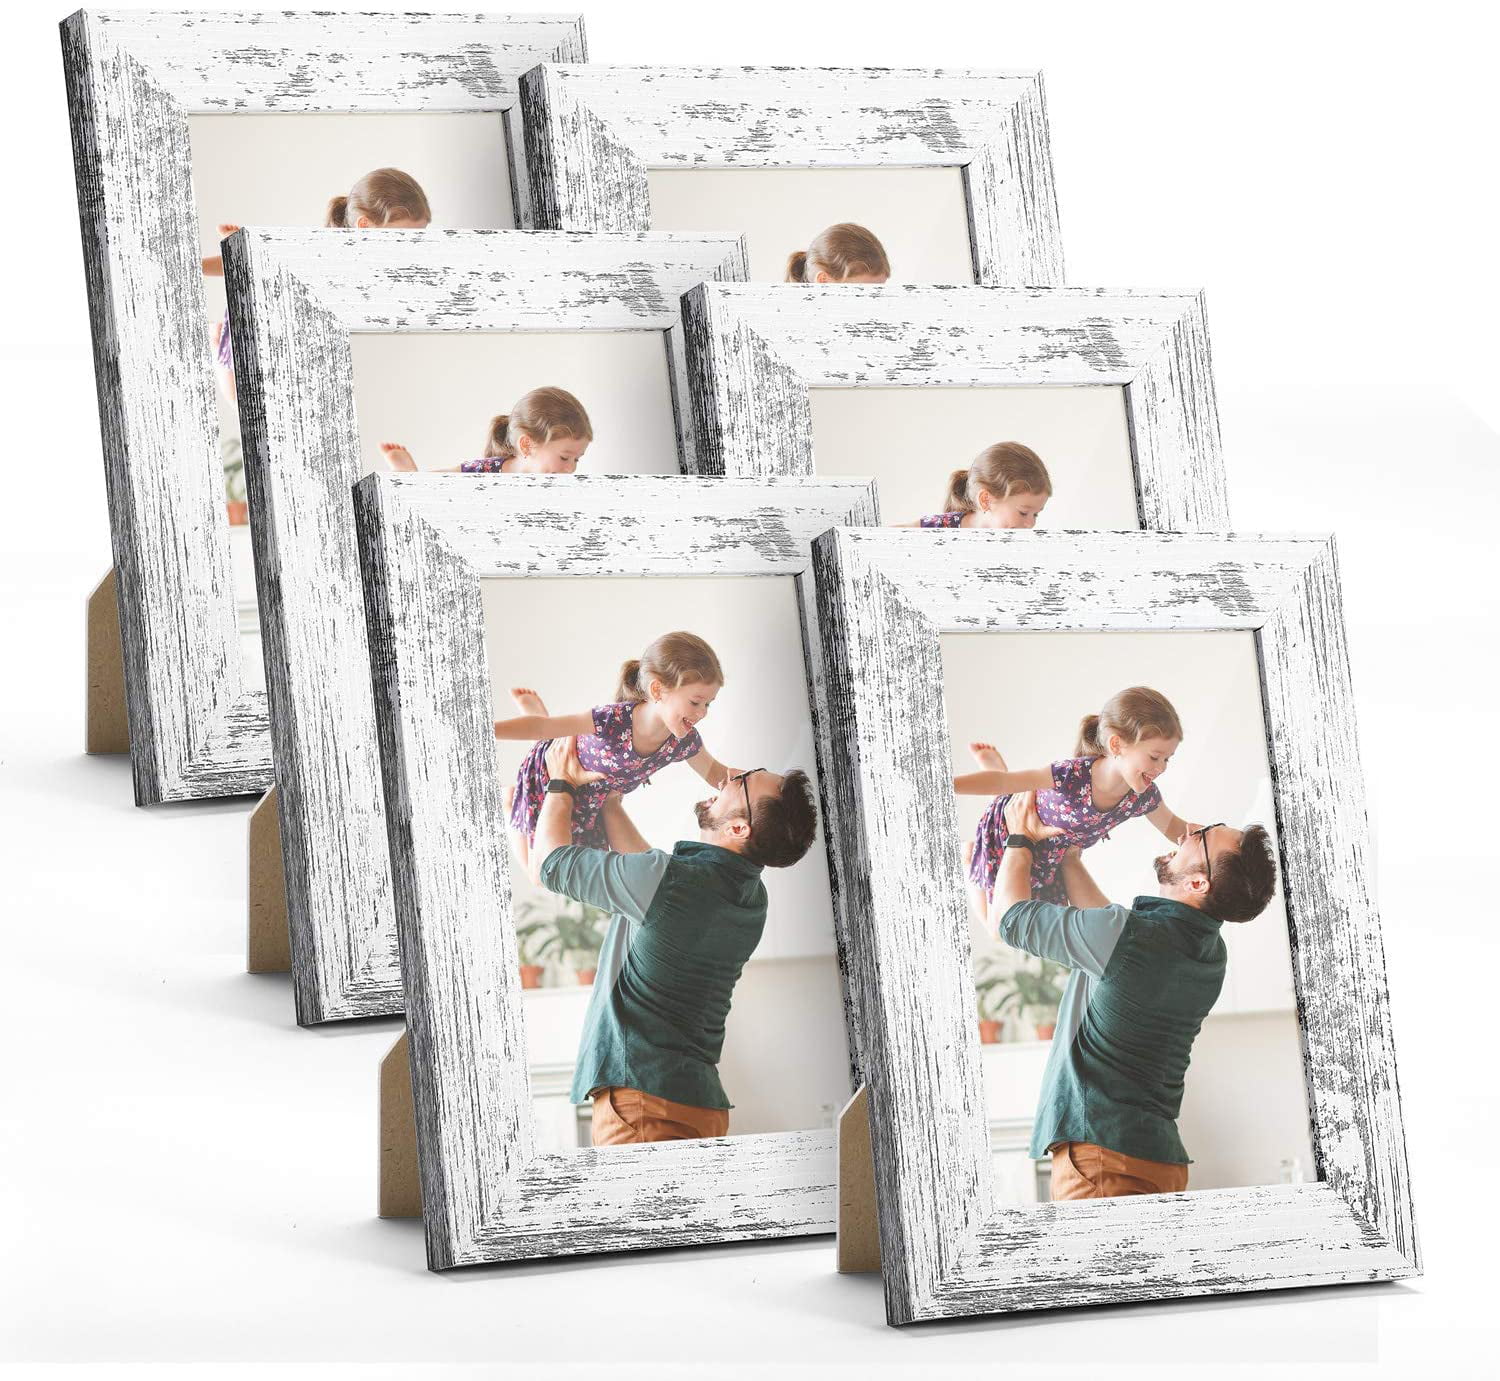 ArtbyHannah 4 x 6 inch 4 Pack Rustic Picture Frame Set in Distressed Wood Grain with High Definition Glass for Table Top Display and Wall Mounting Photo Frame for Farmhouse or Home Decoration